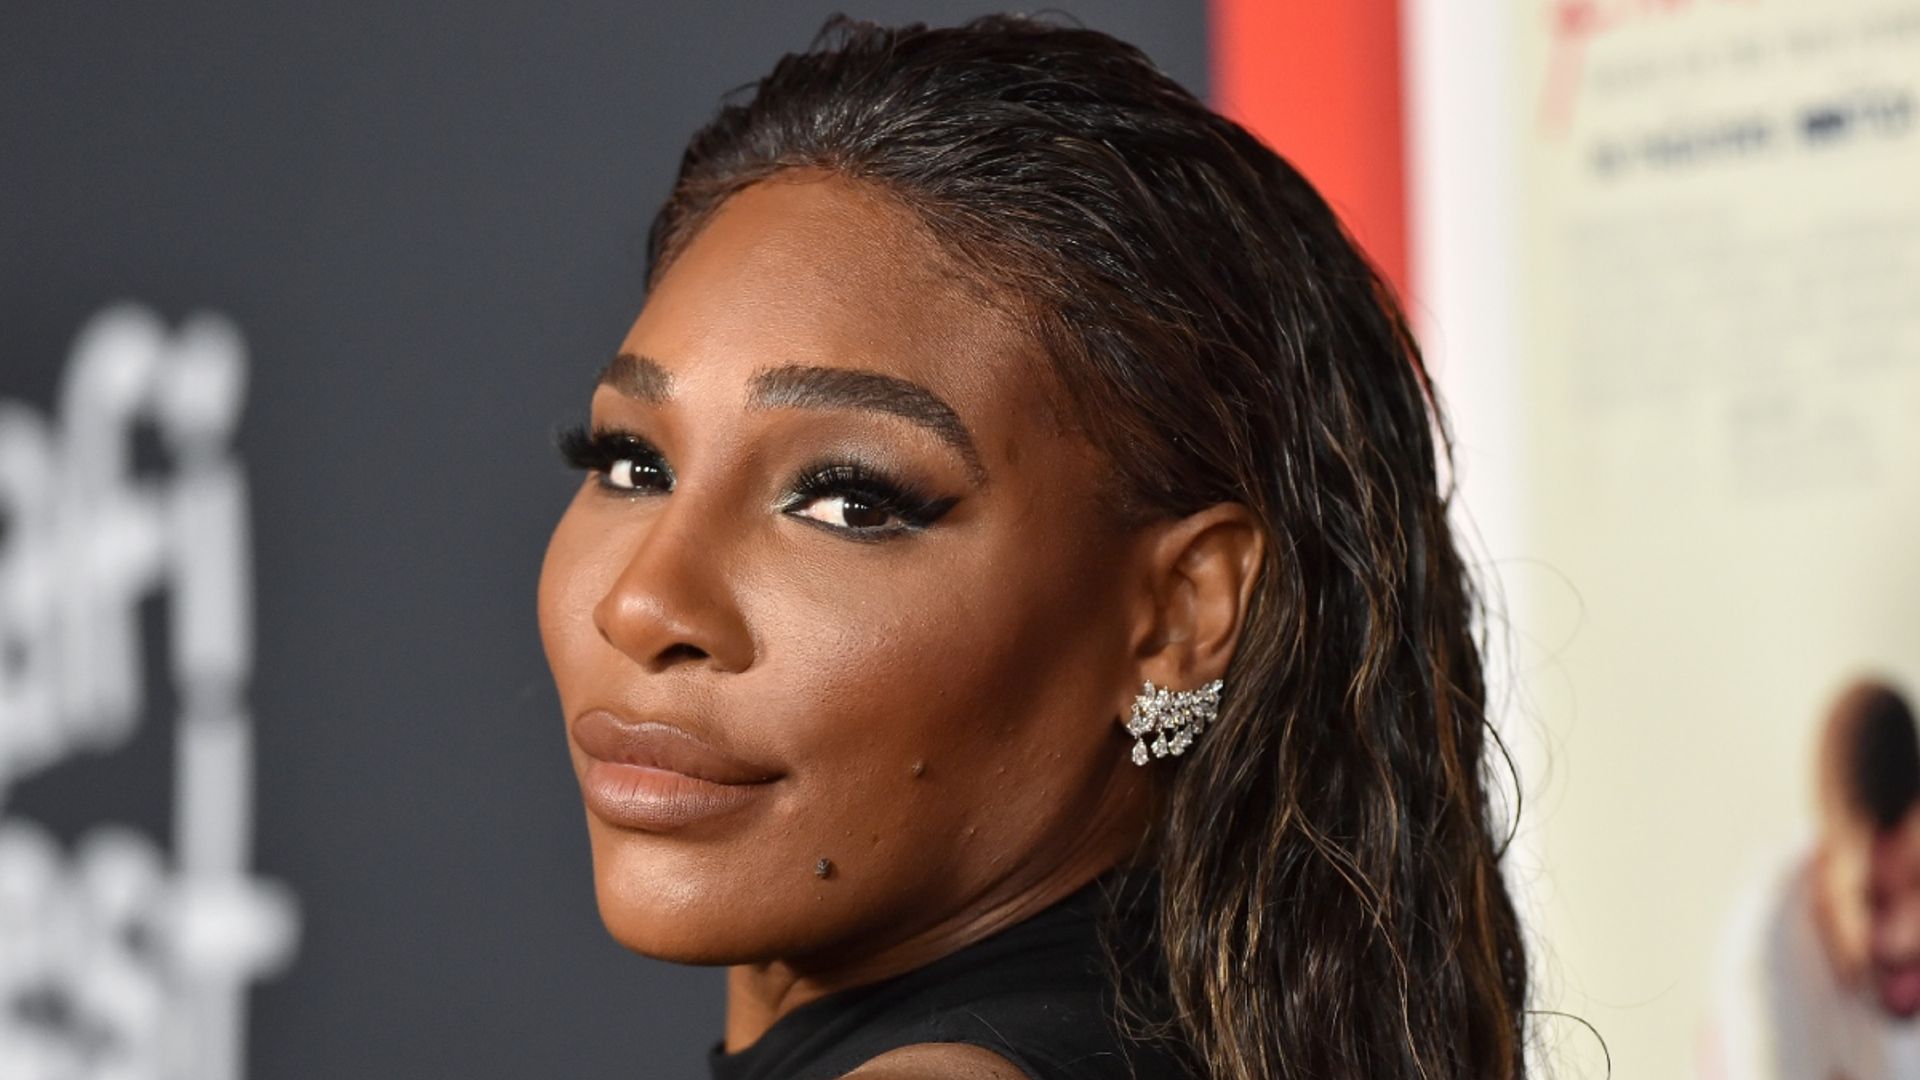 Serena Williams stuns in cozy black mini dress but fans obsess over her boots